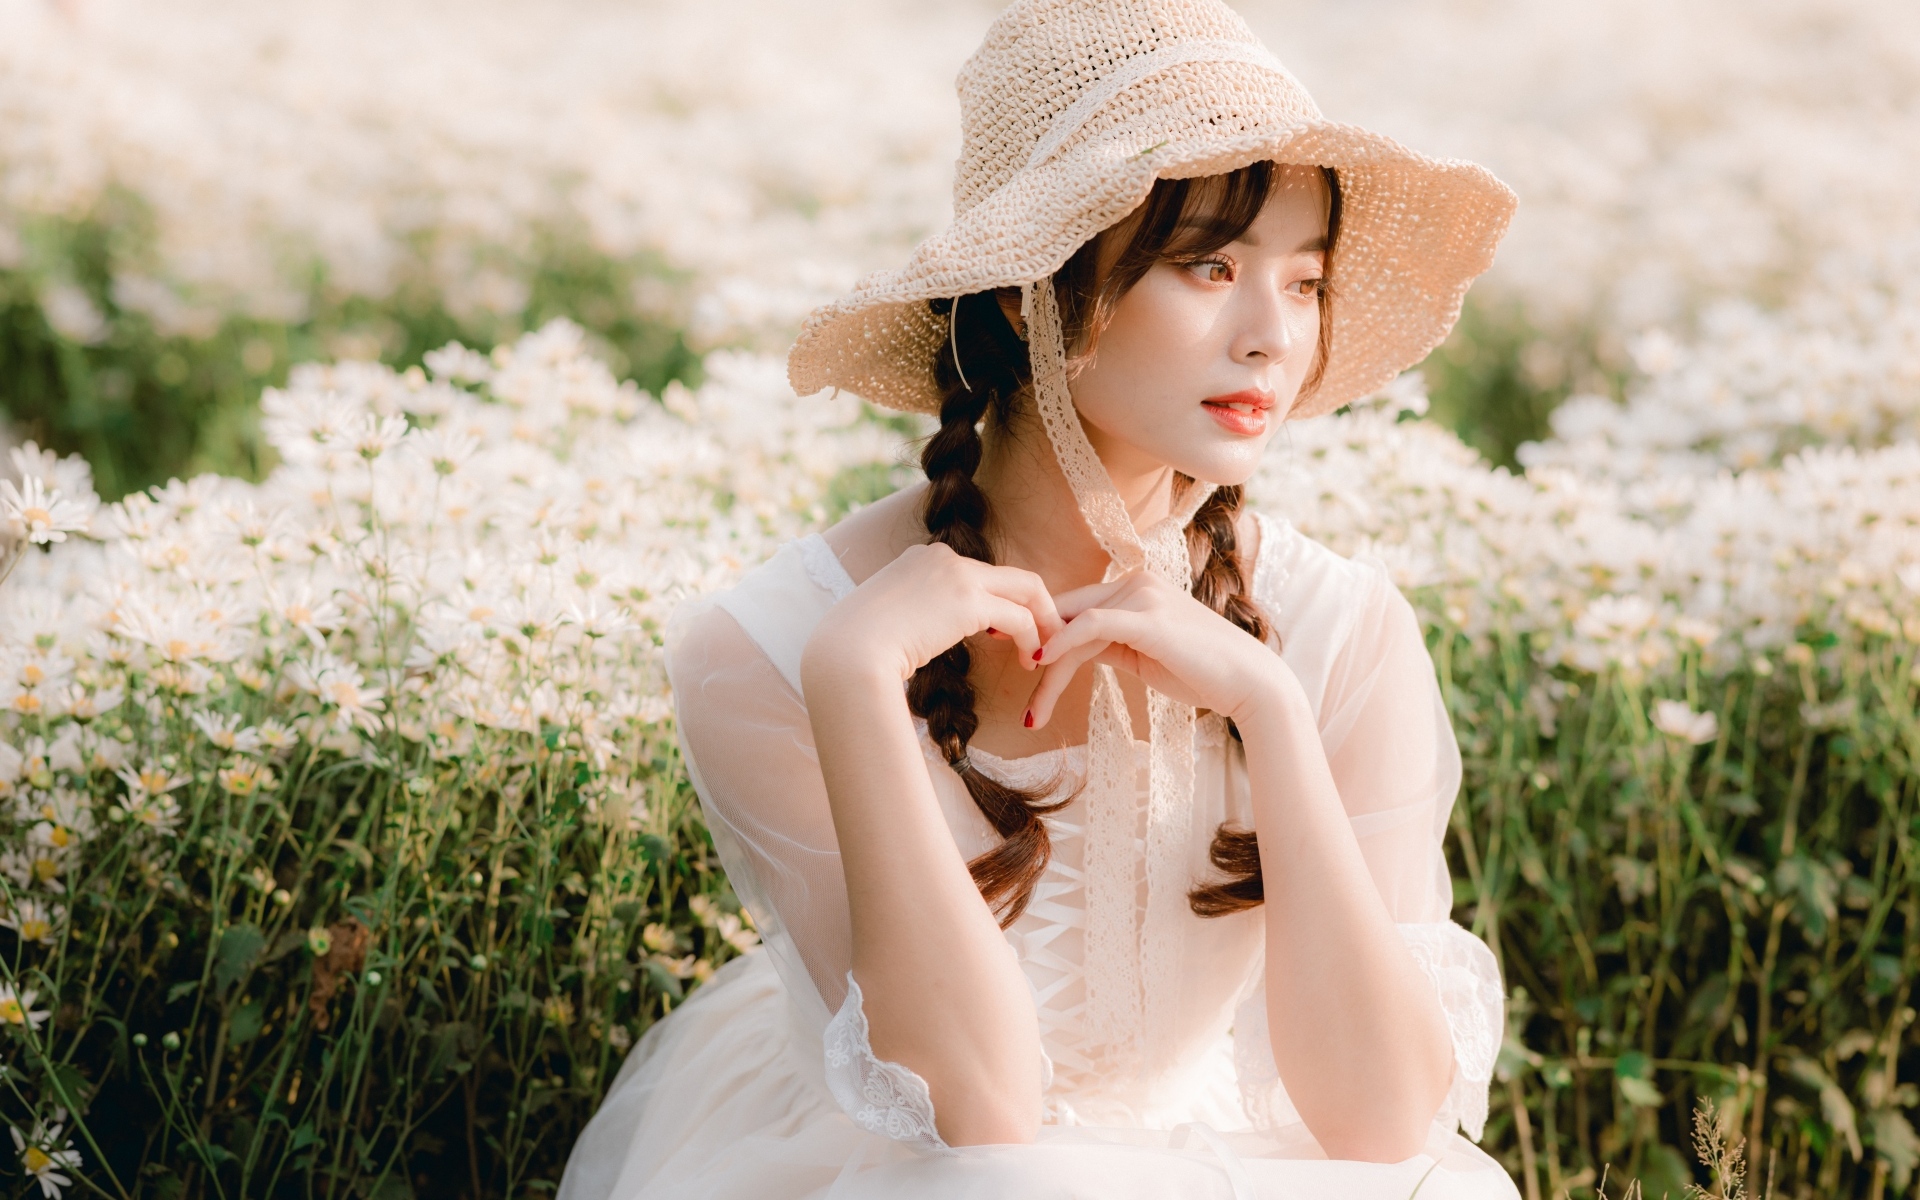 Cute asian woman in hat and white dress